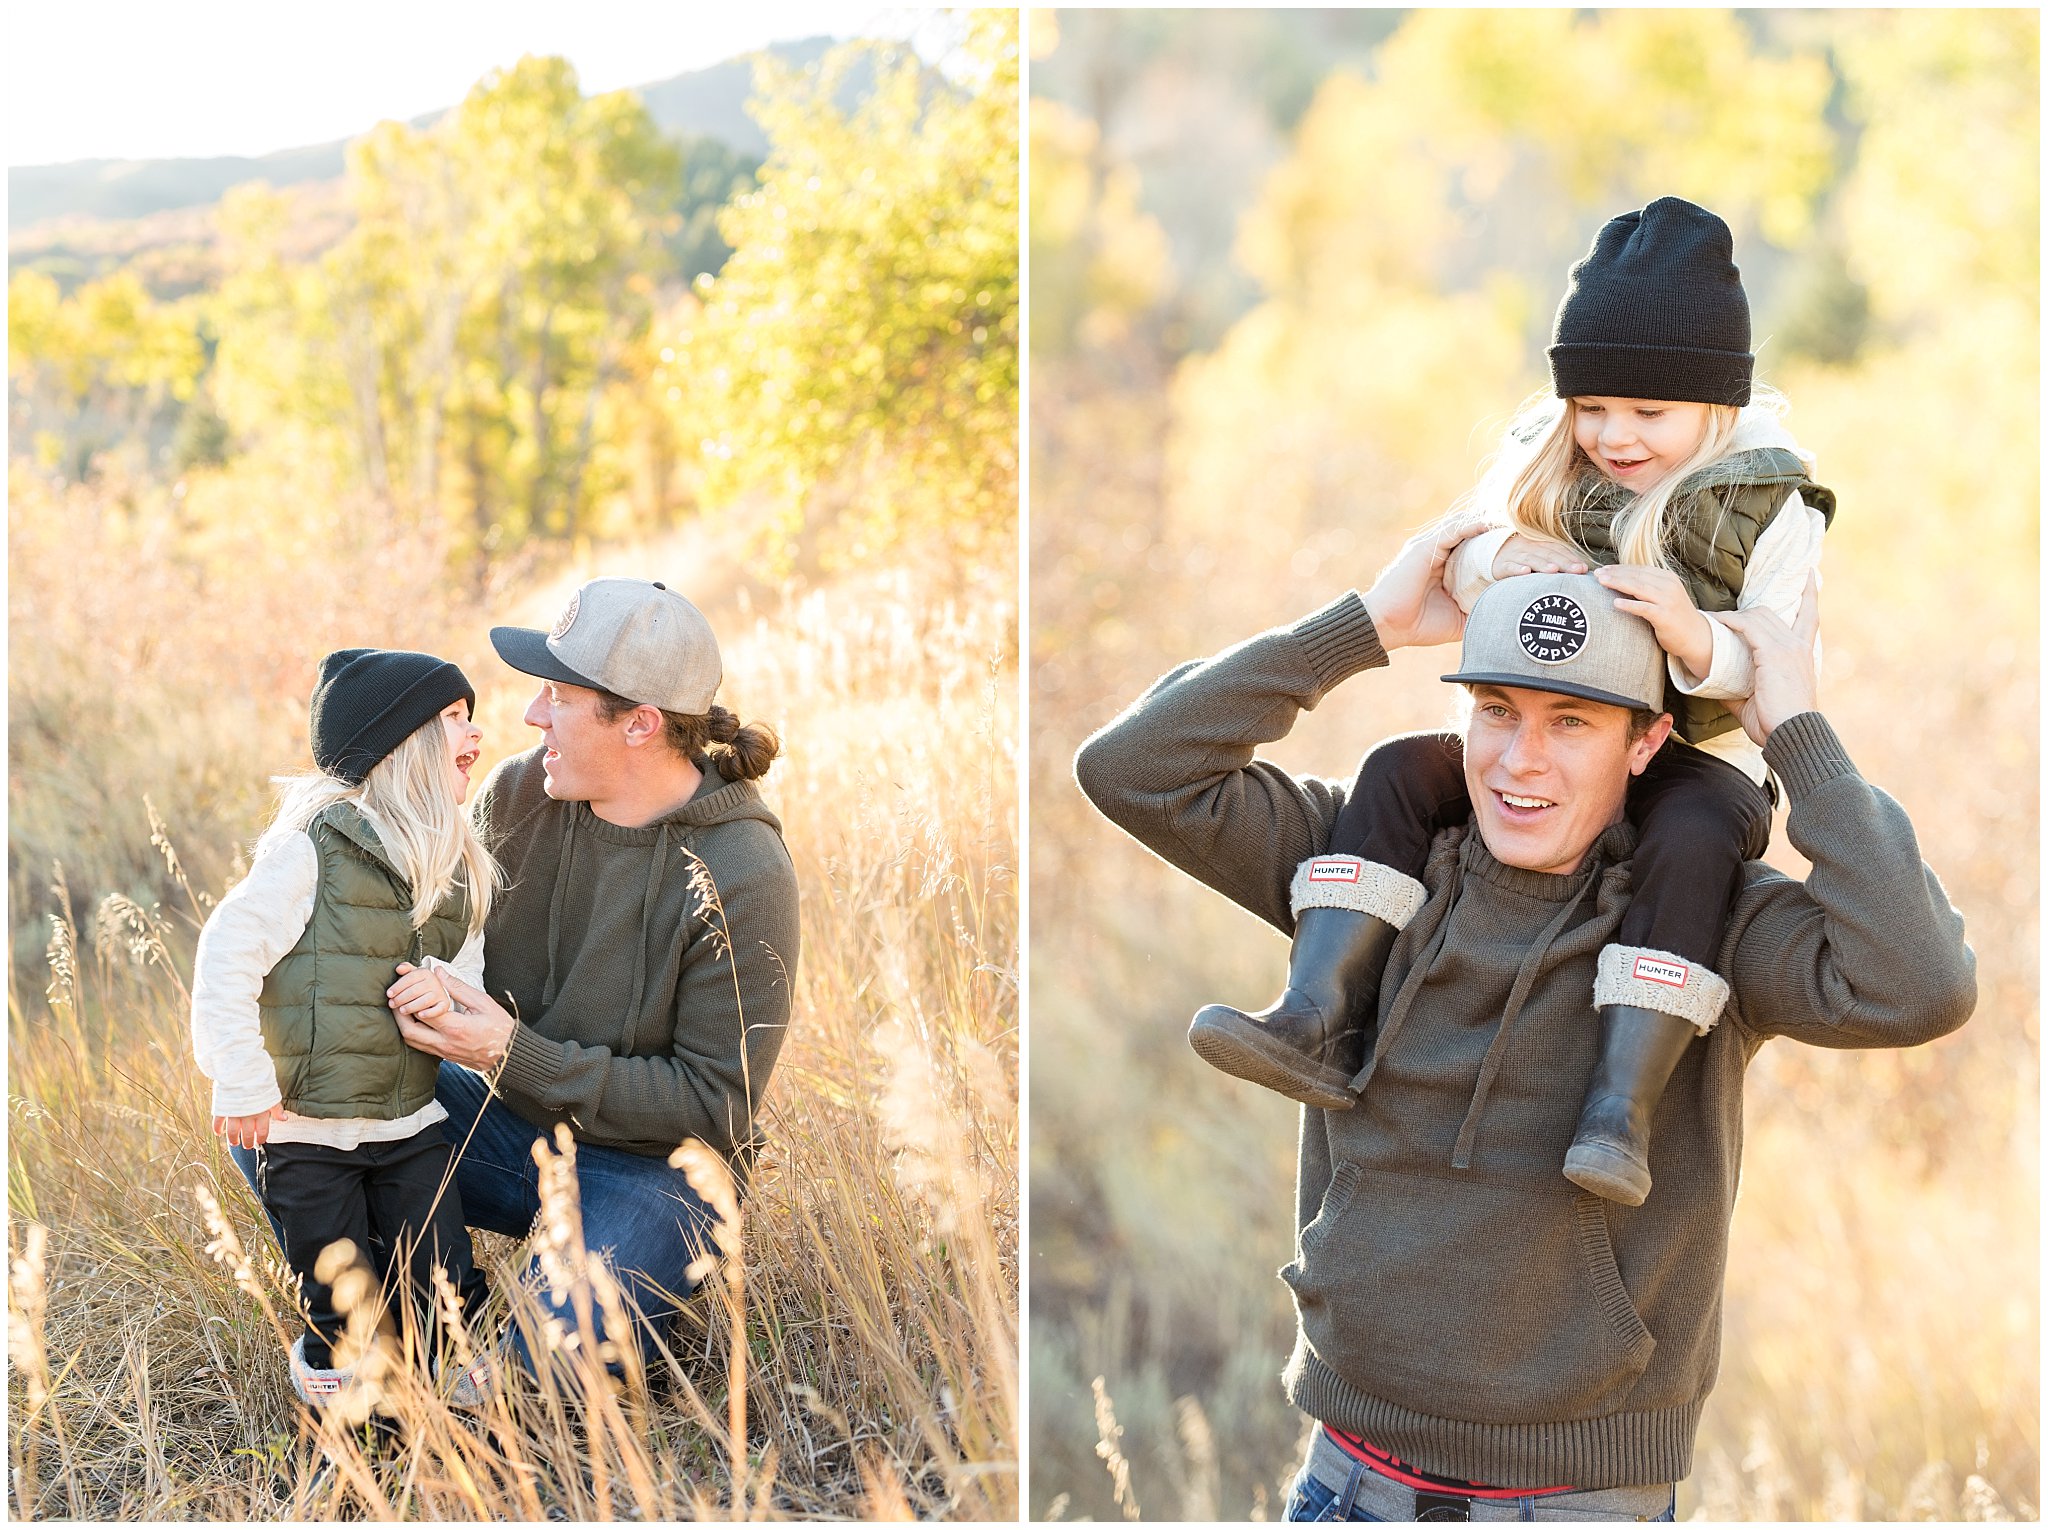 Dad and son having fun and a piggy back ride | Fall Family Pictures in the Mountains | Snowbasin, Utah | Jessie and Dallin